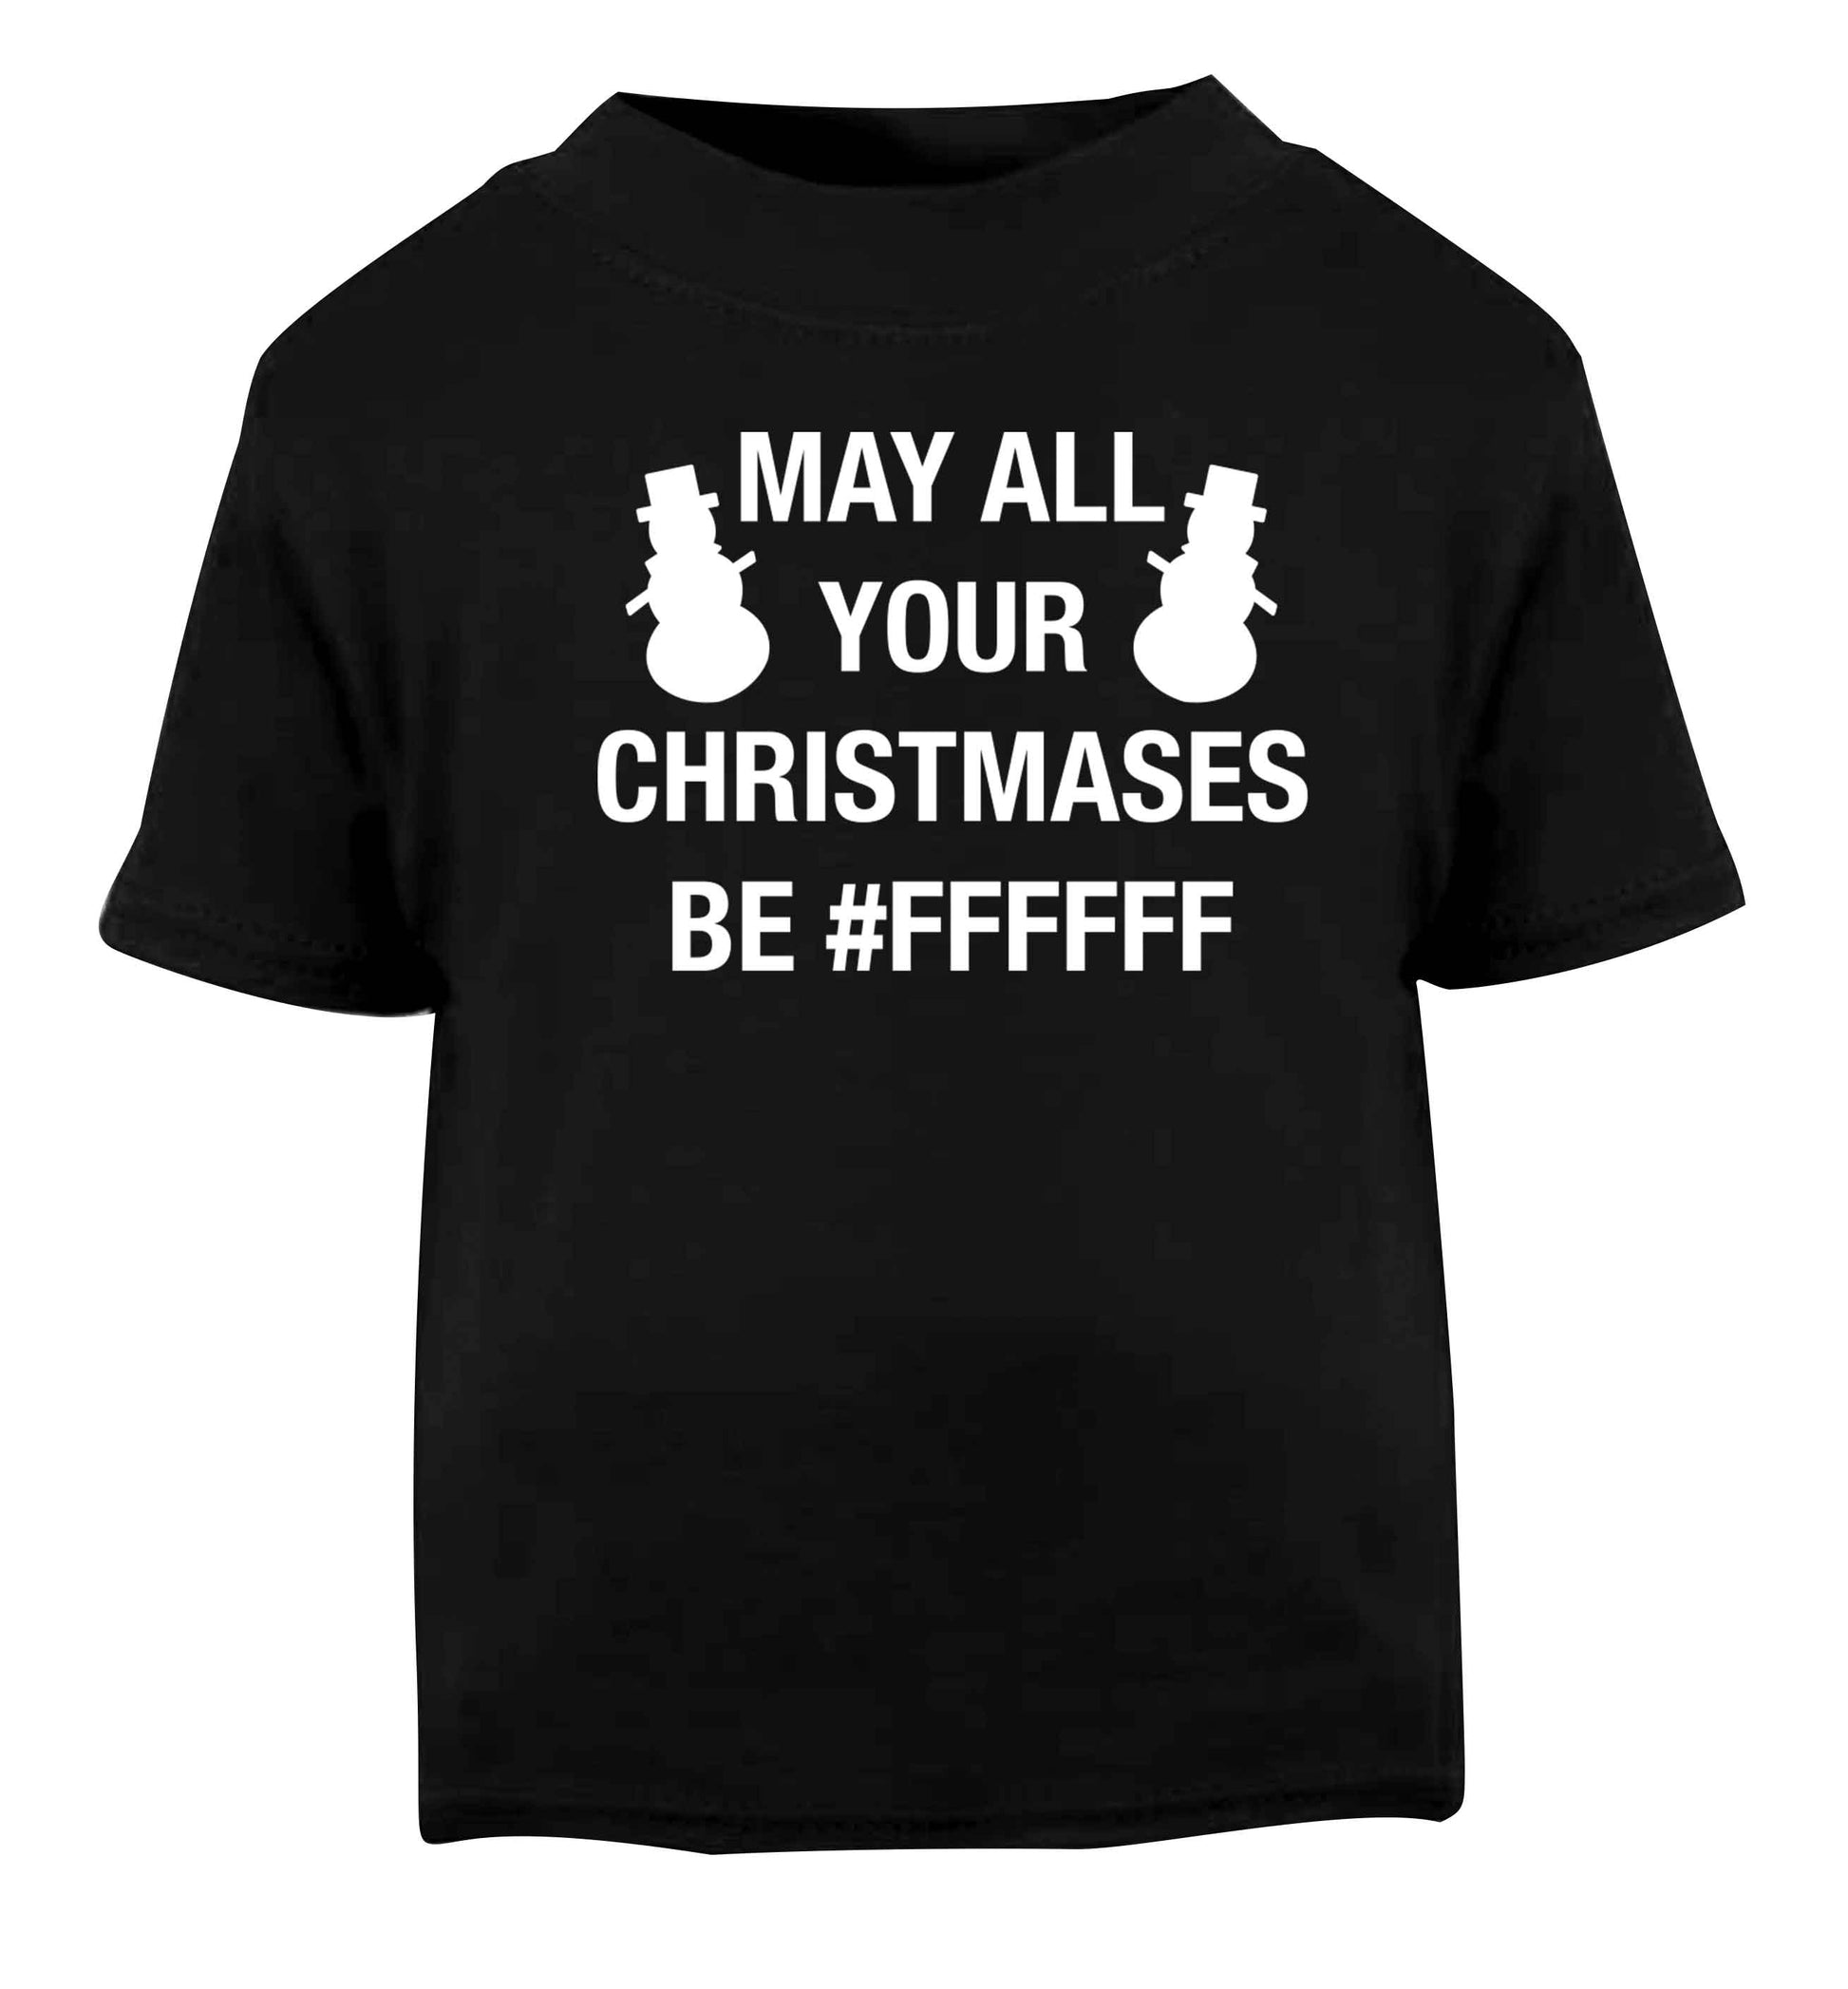 May all your Christmases be #FFFFFF Black baby toddler Tshirt 2 years